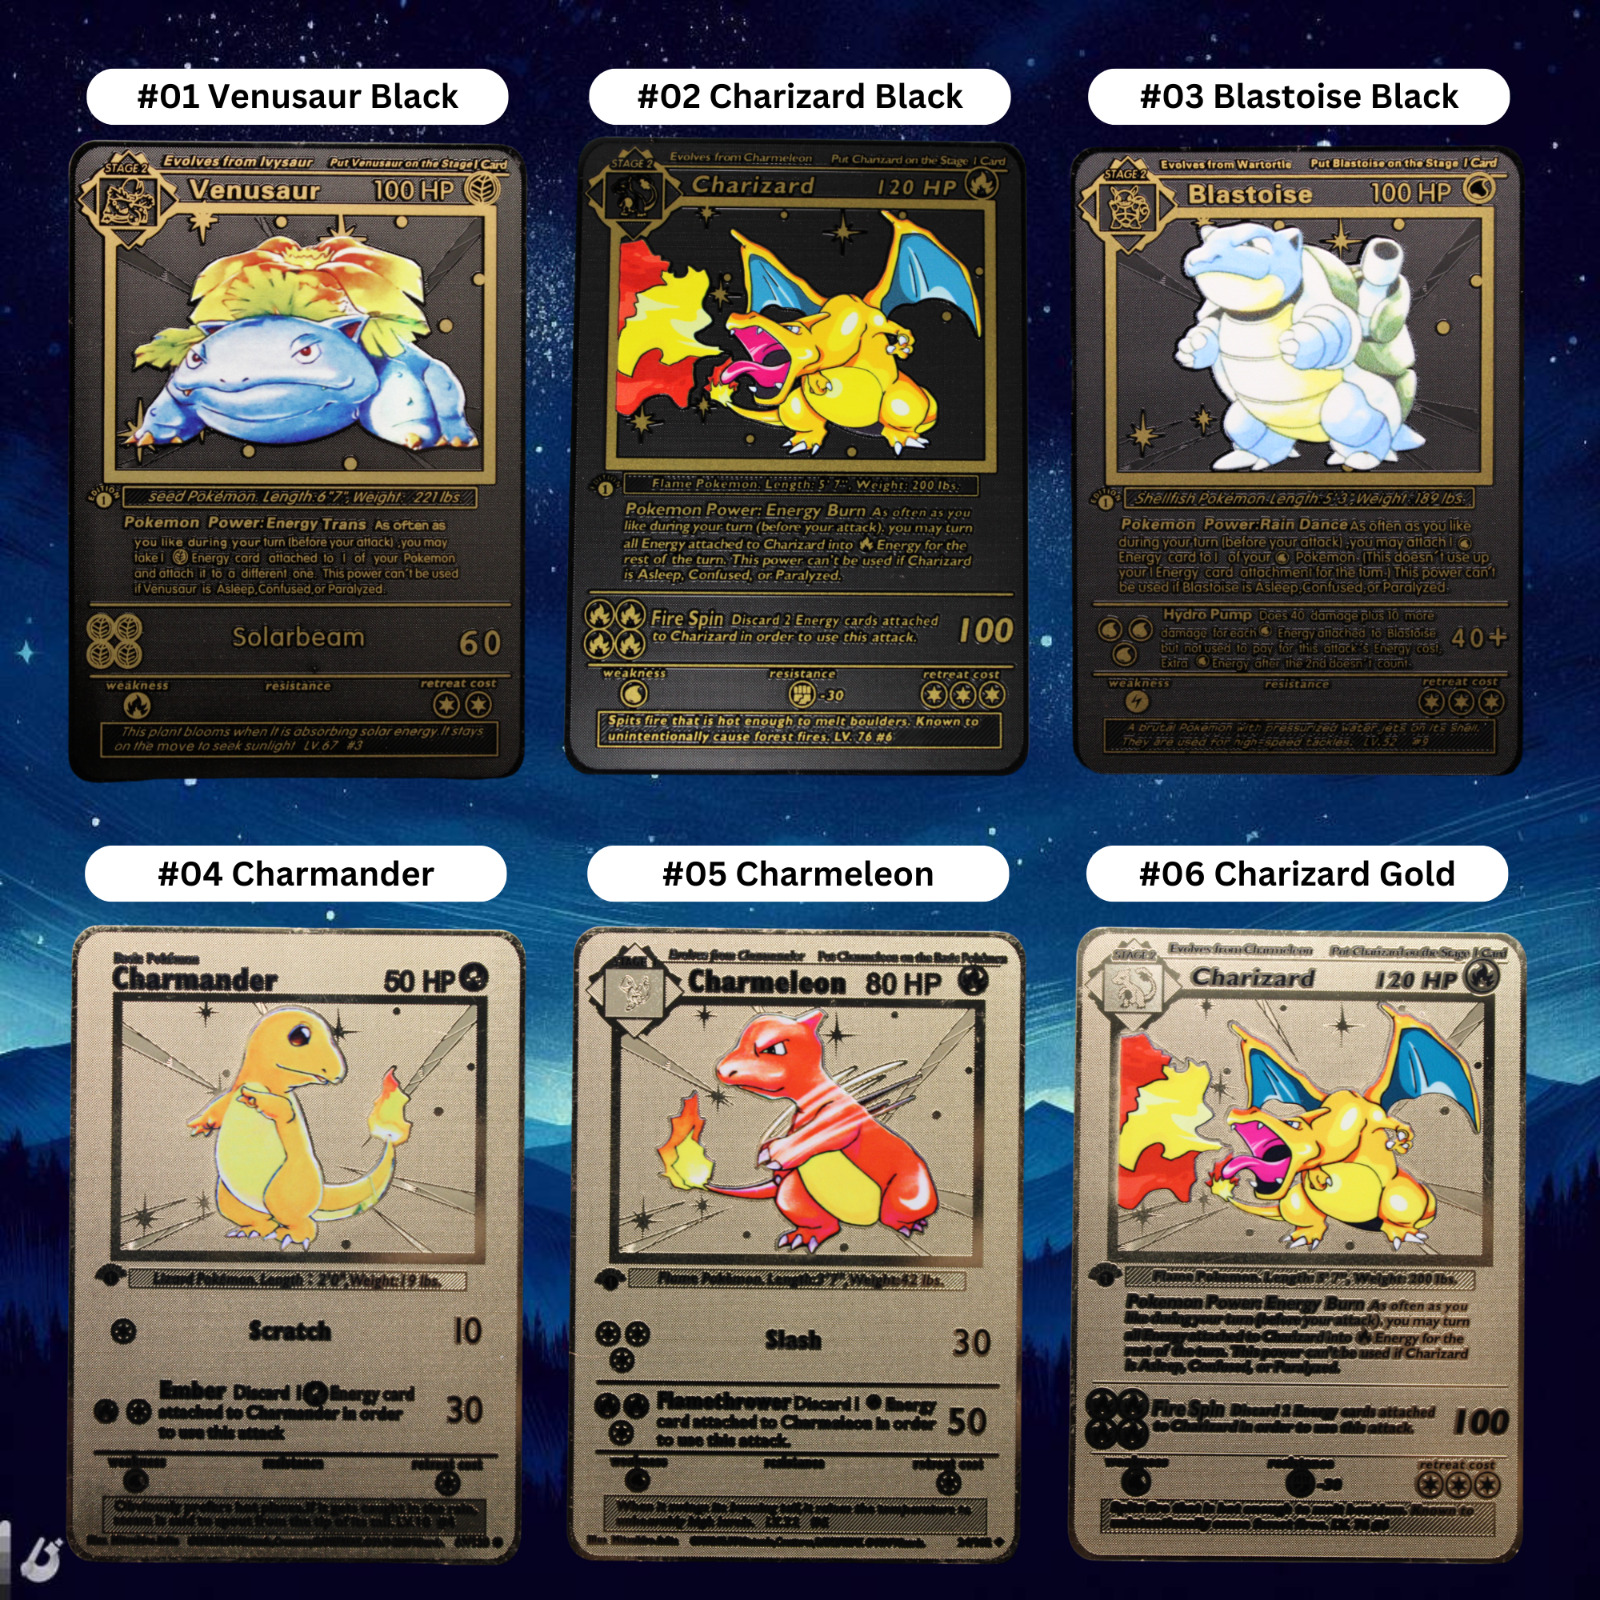 43 Unique Gold metal Card Pokemon 1st Edition Collectible Display/Gift for Kids